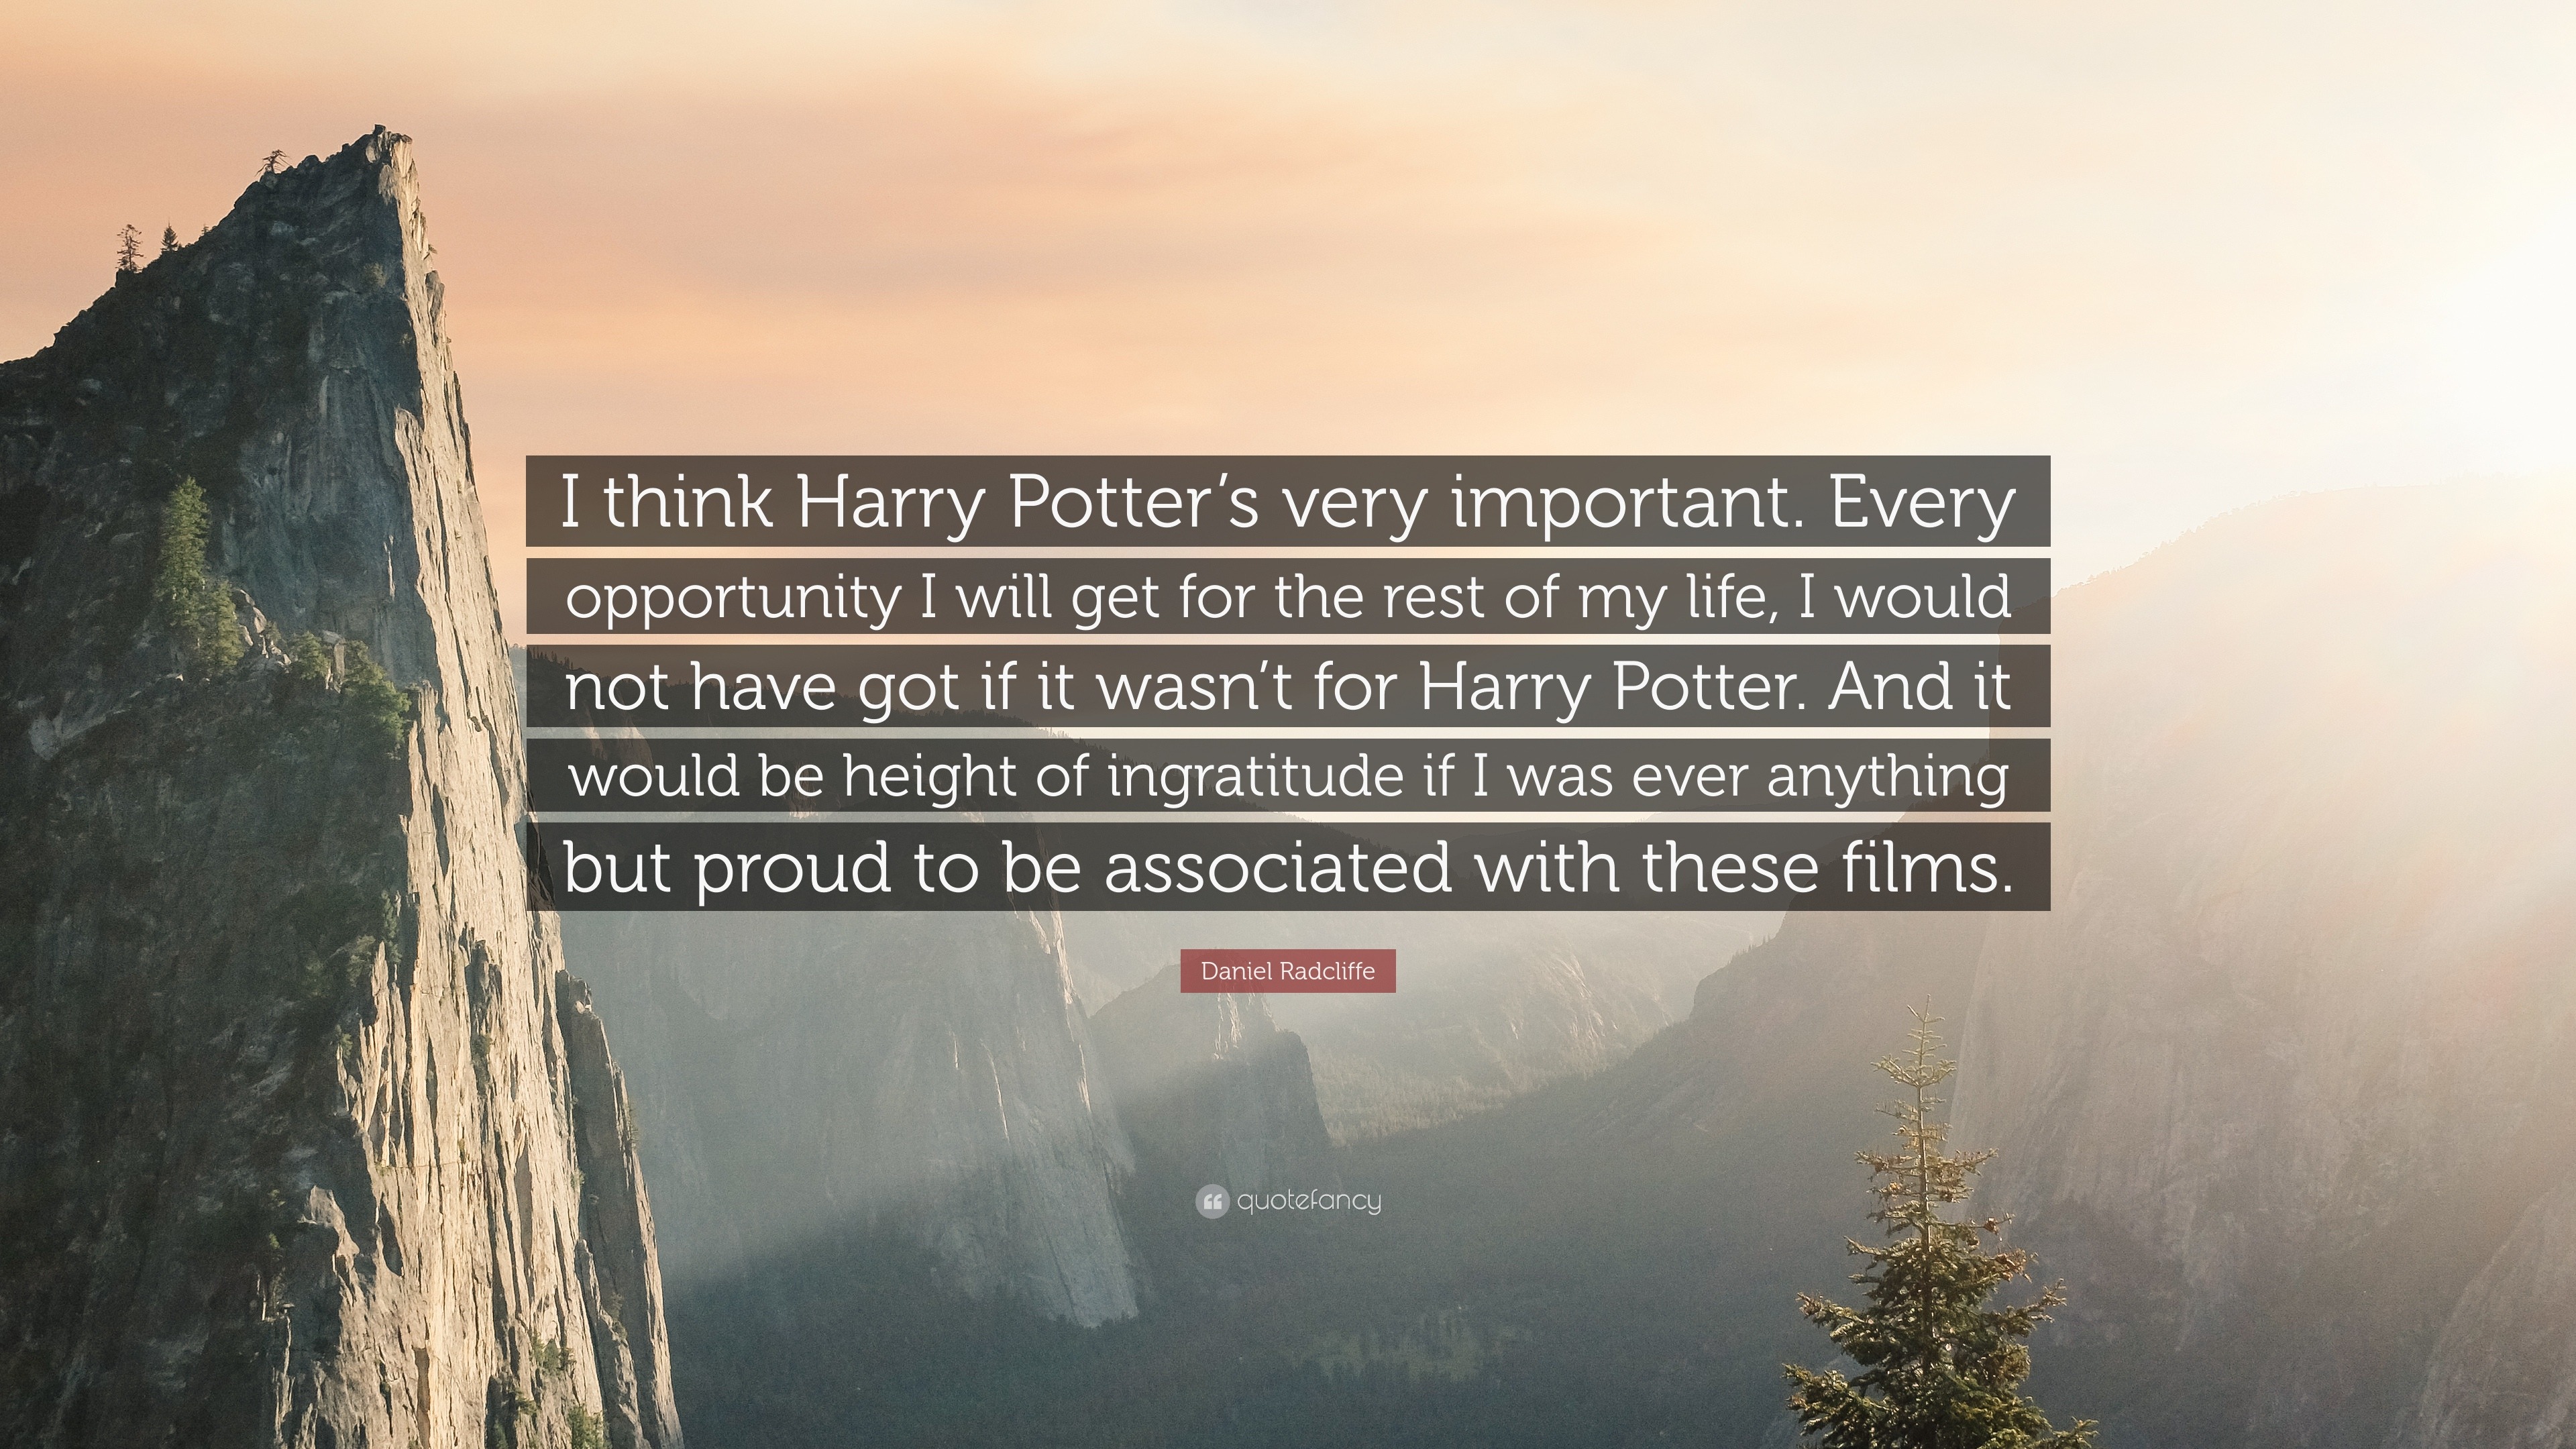 Daniel Radcliffe Quote “I think Harry Potter s very important Every opportunity I will